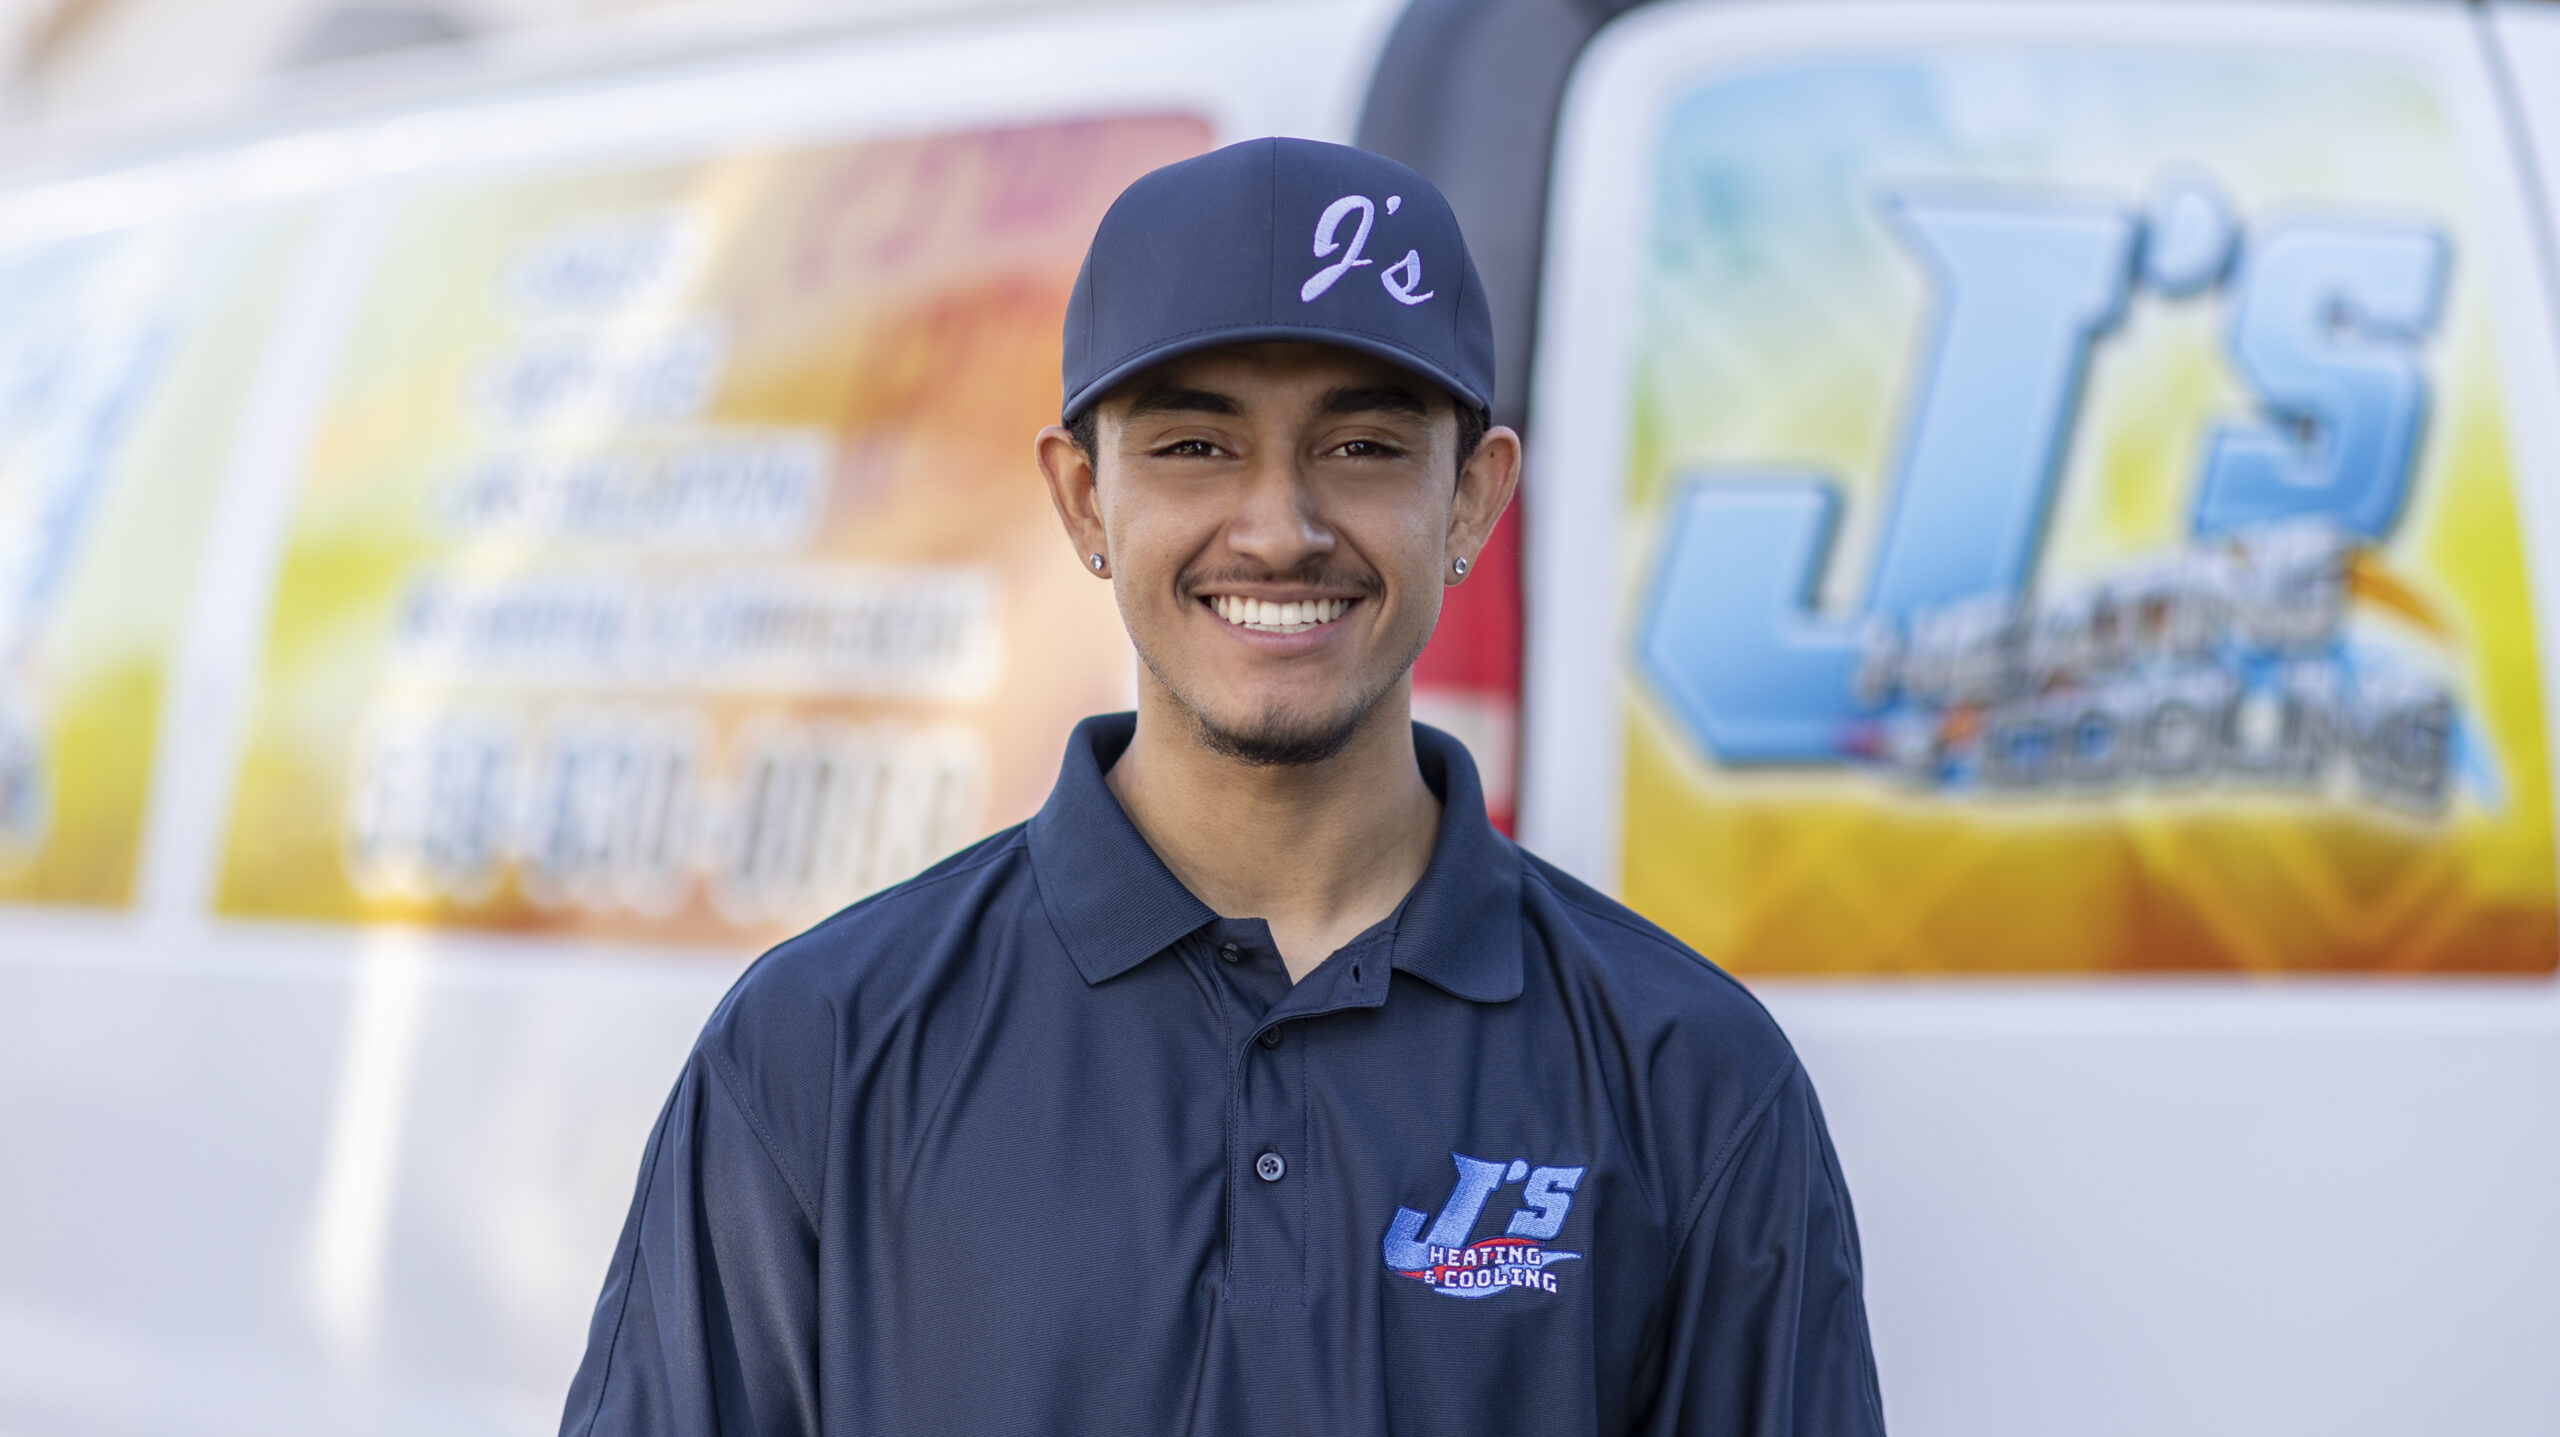 J's Heating and Cooling Raul Van profile picture.